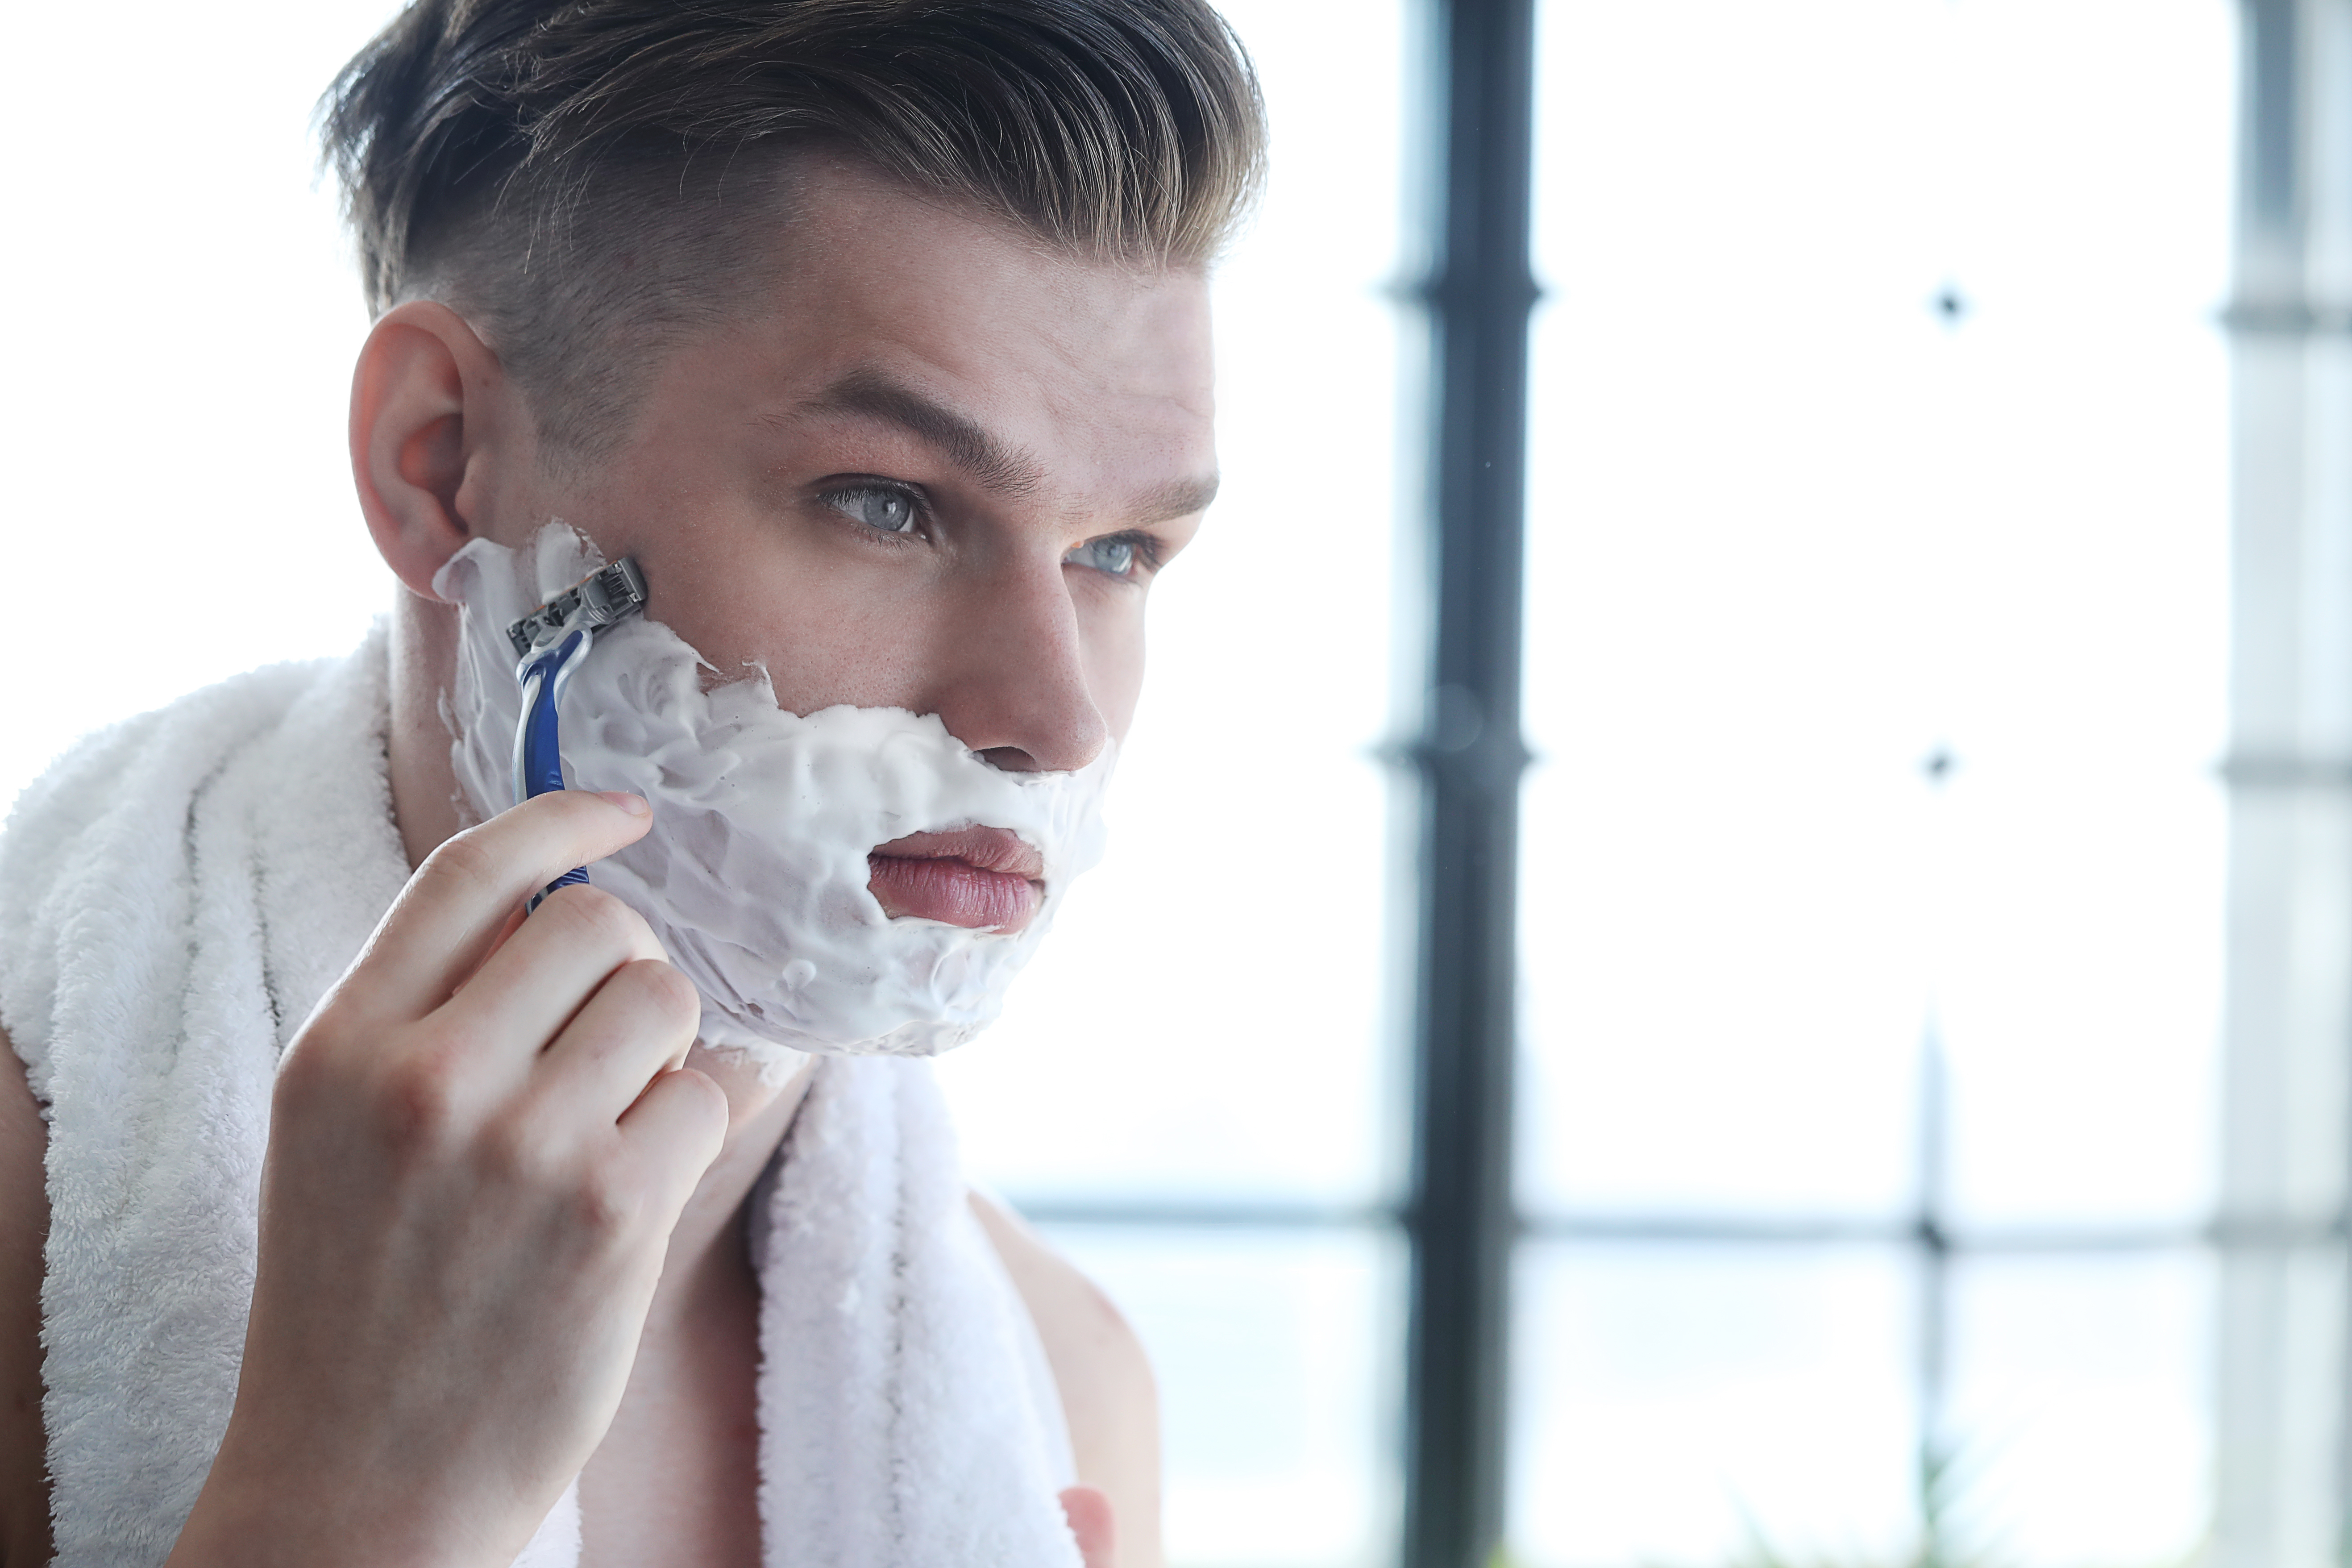 A man shaving with Gillette's razor